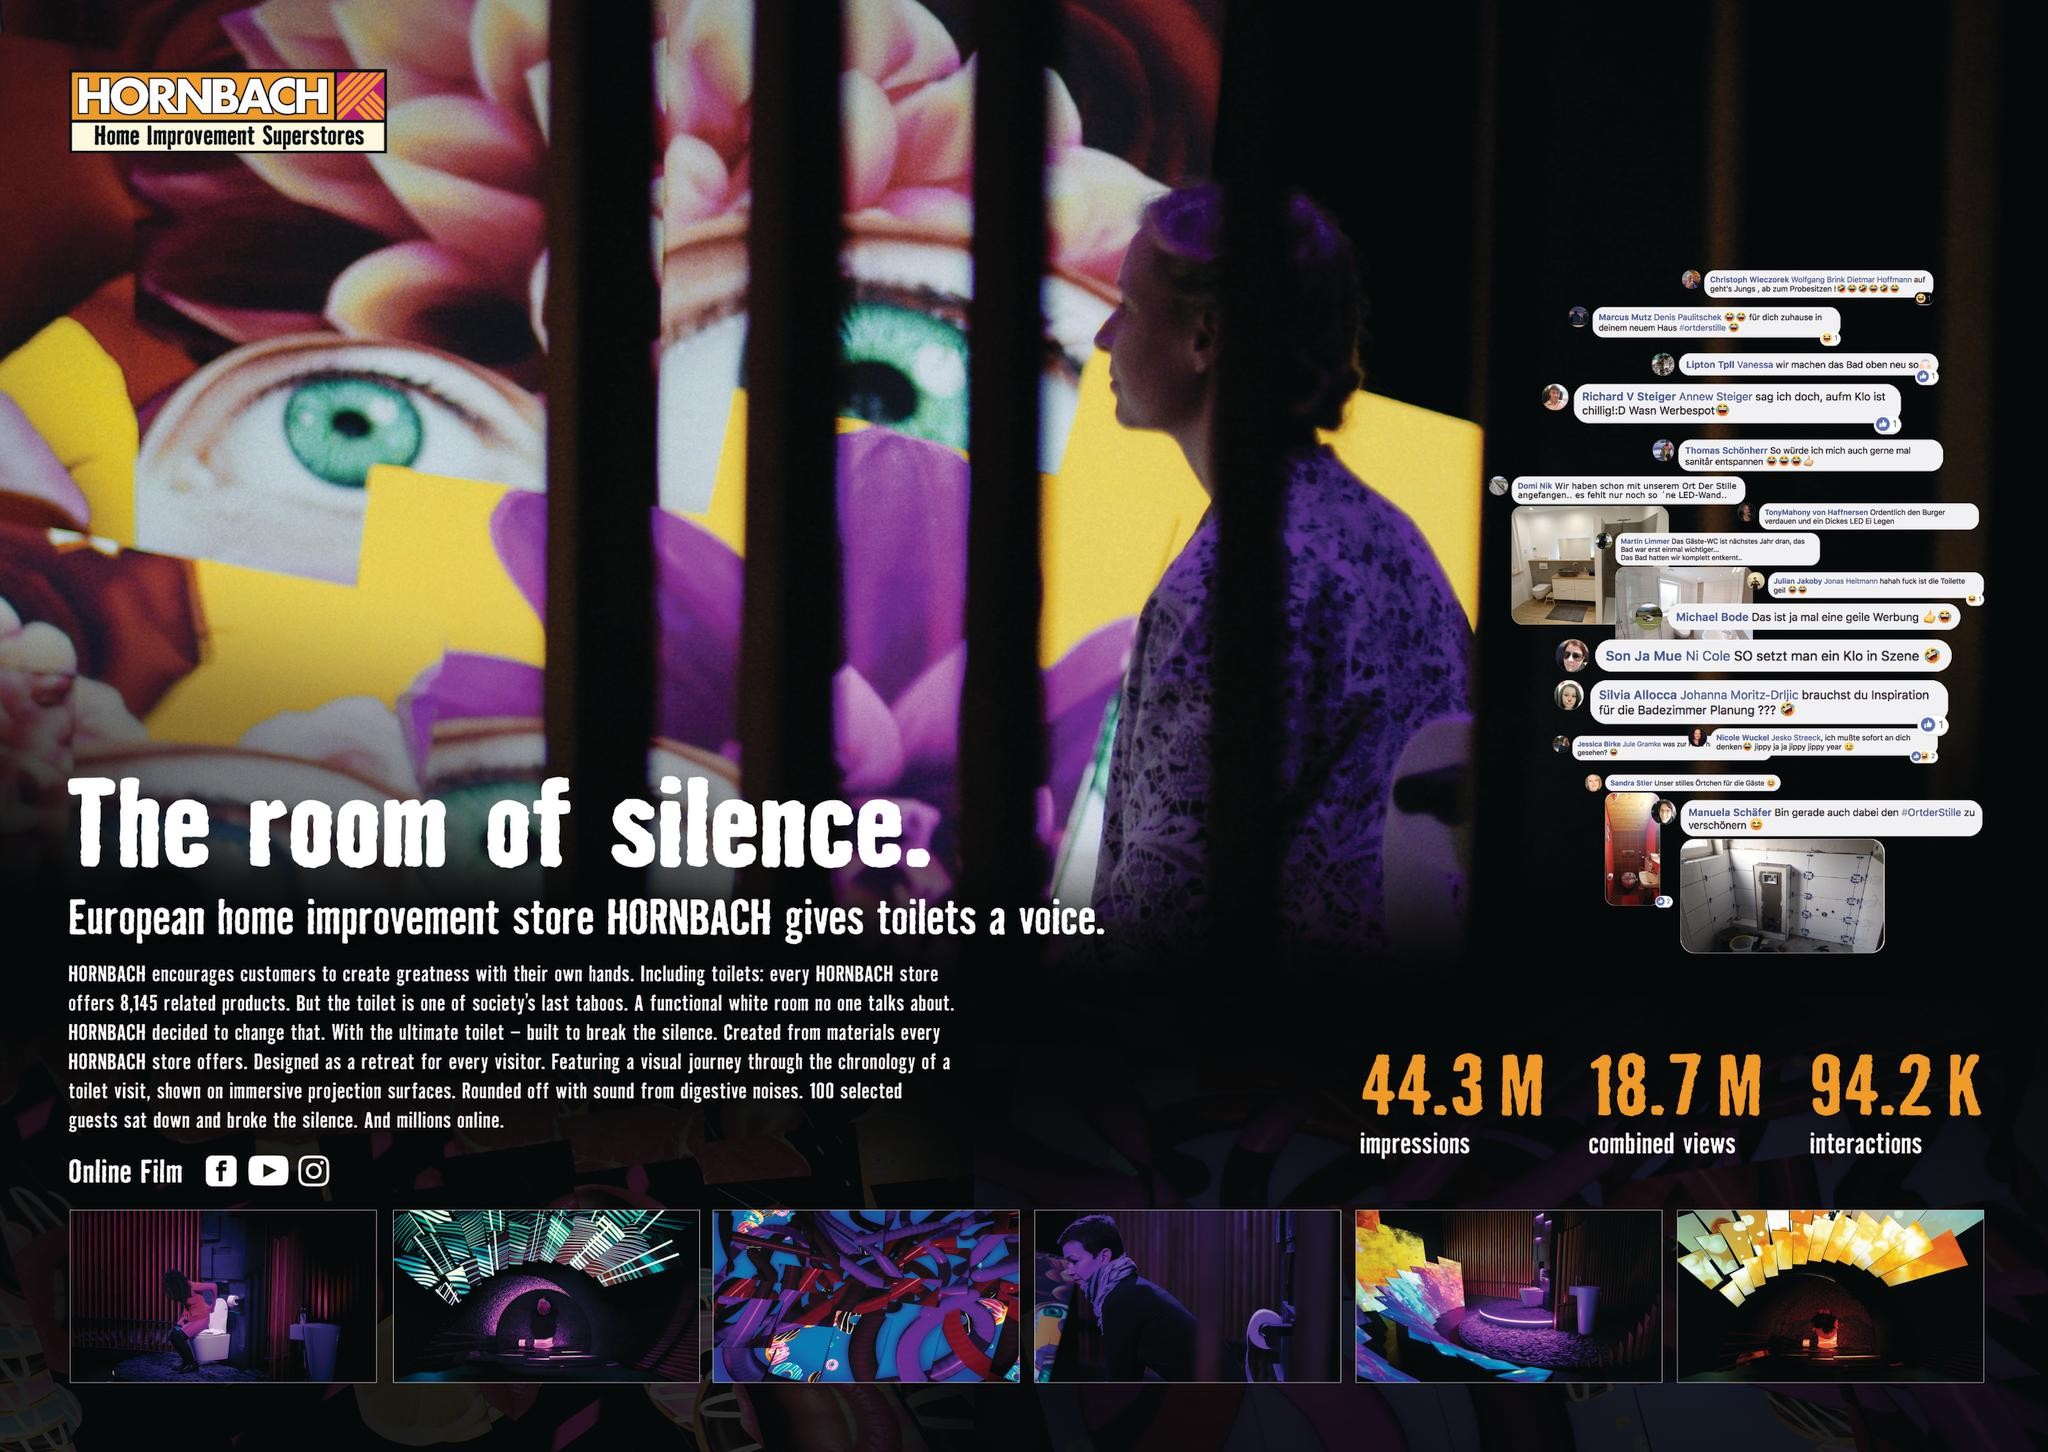 HORNBACH "Room of silence – Giving toilets a voice."